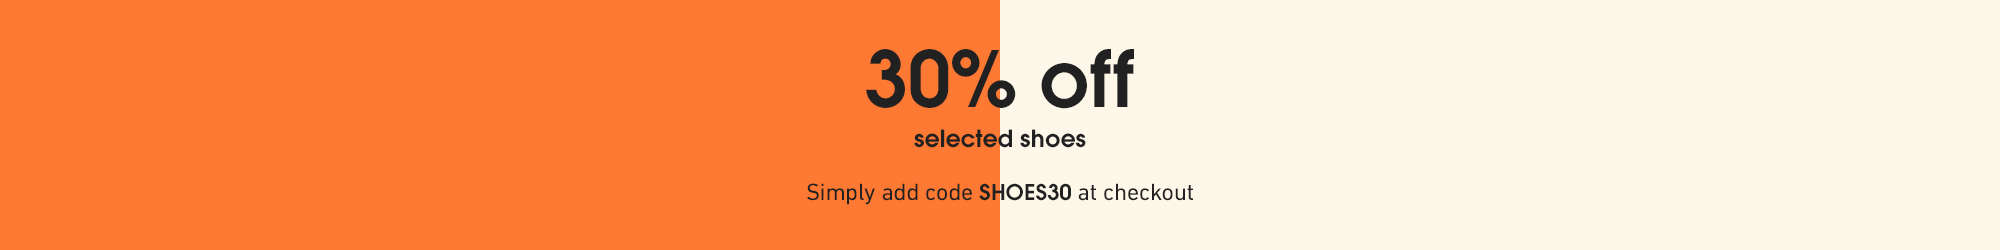 30% off selected shoes